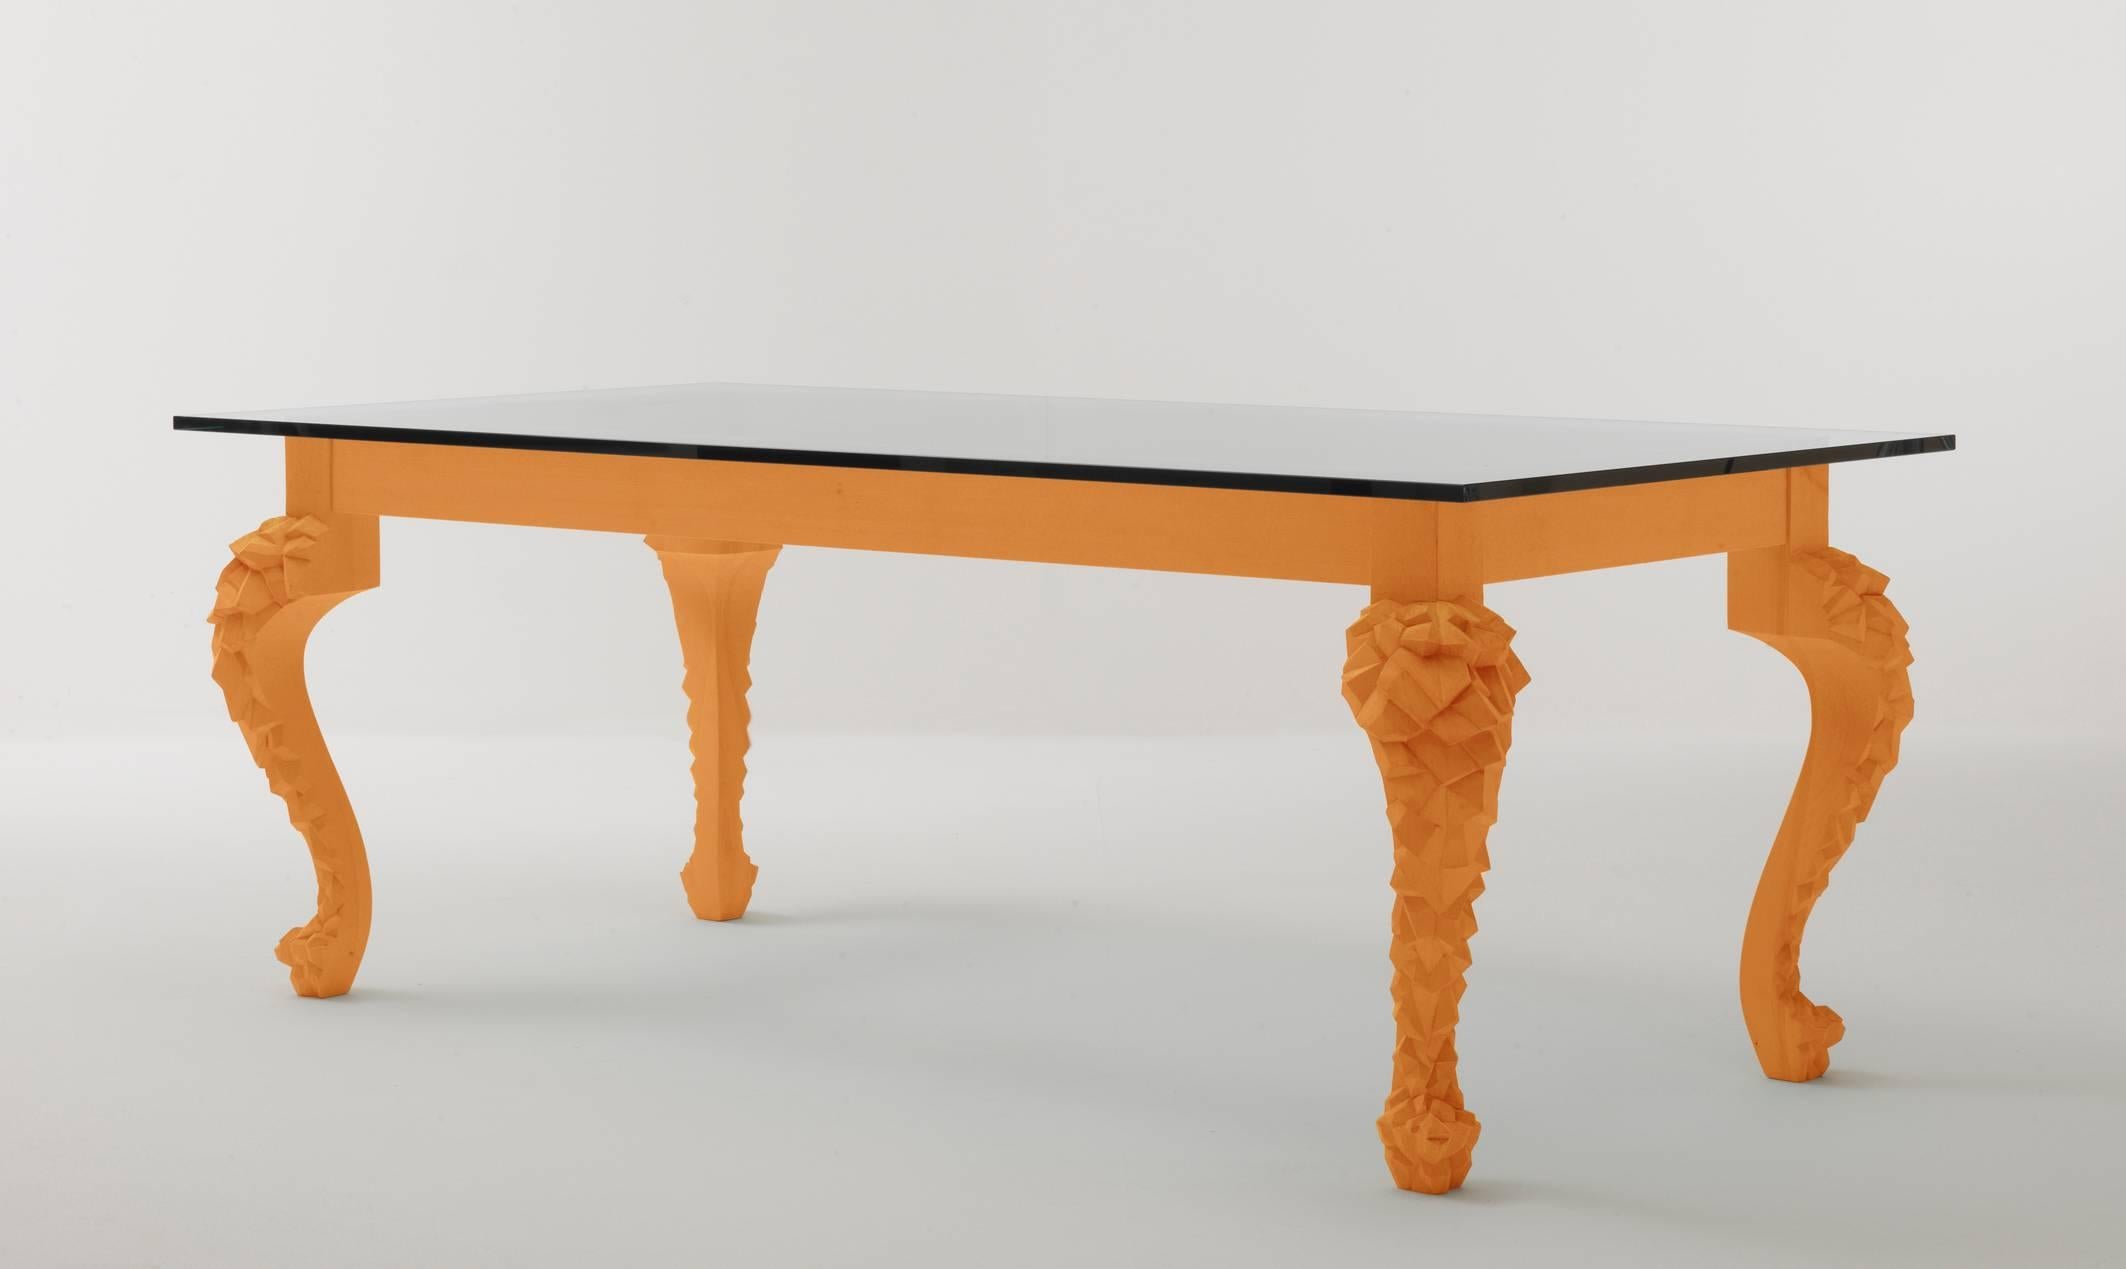 A double take on the table with a traditional cabriole leg. The Crusty table has a very special leg that has been processed digitally; Coates adjusted a scan of an original leg from Fratelli Boffi’s archive, and by adjusting the settings, came up